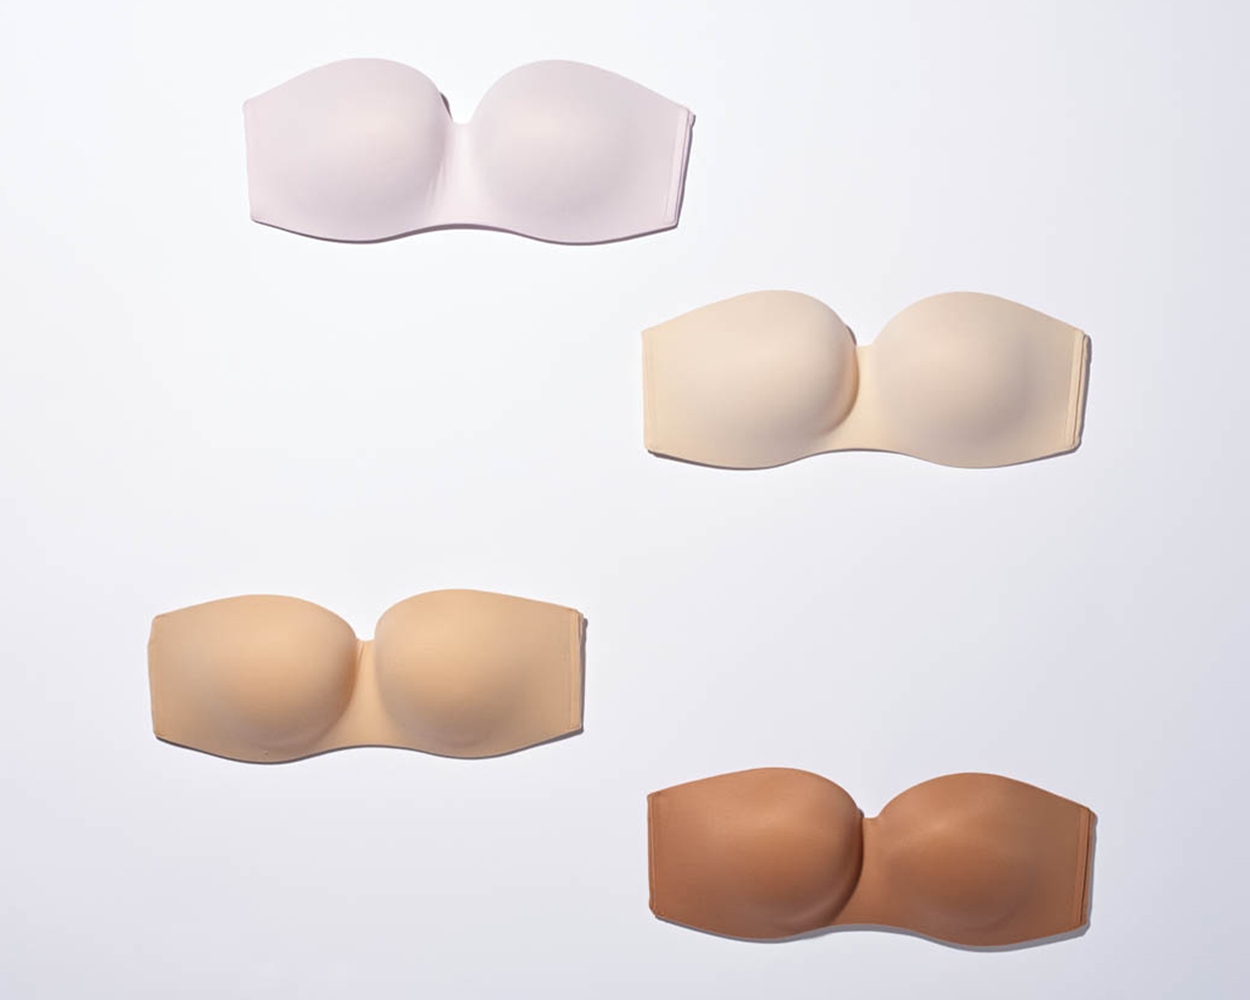 Soma<sup class=st-superscript>®</sup> laydown of strapless bras in various nude shades.